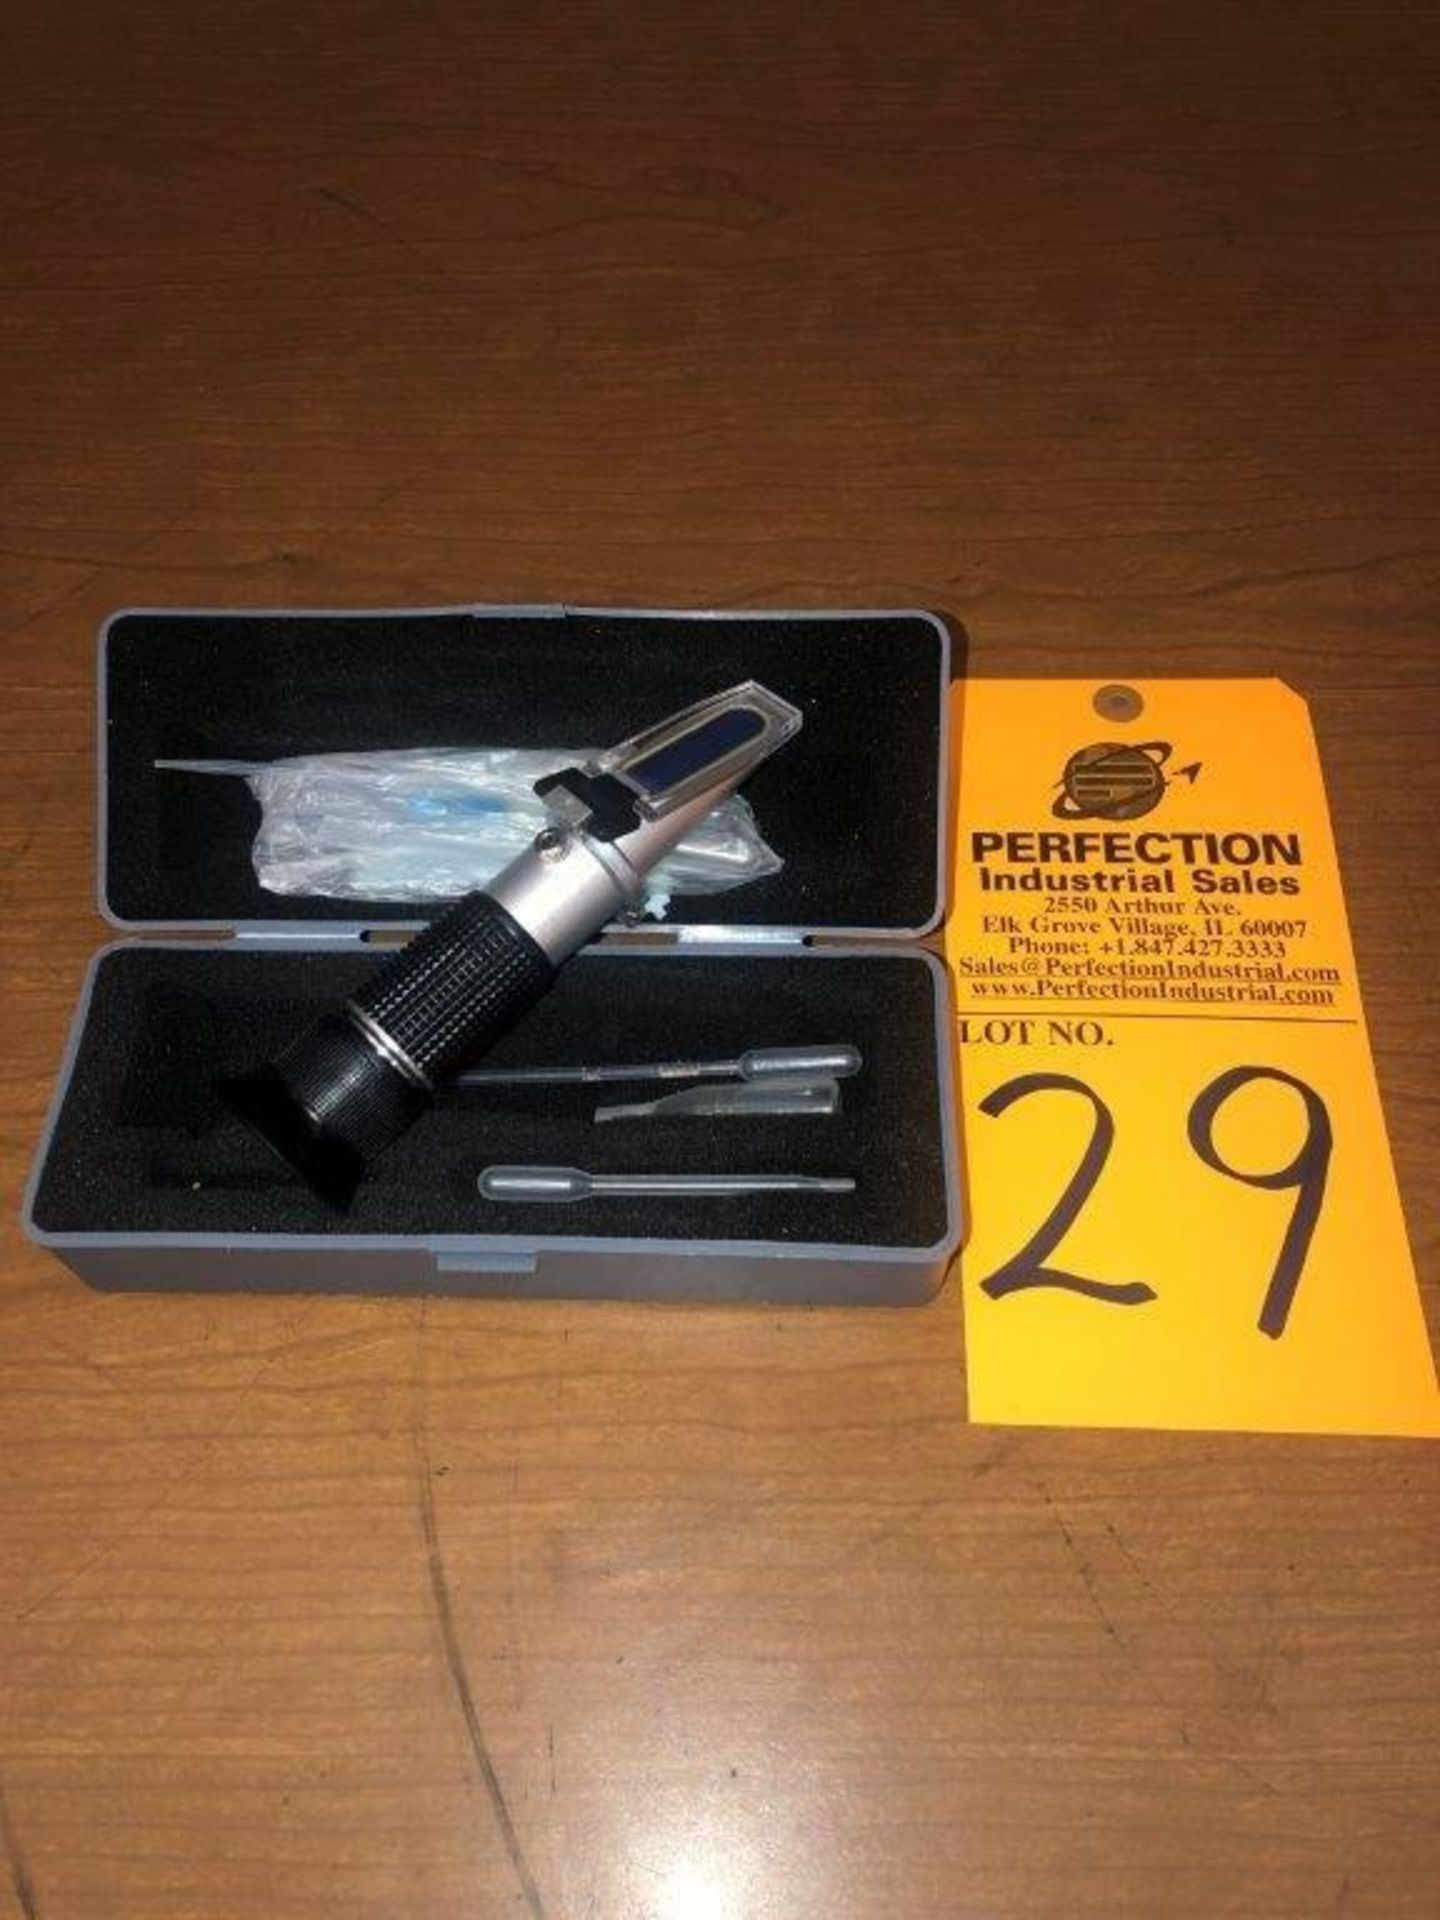 Portable Refractometer - Image 2 of 3